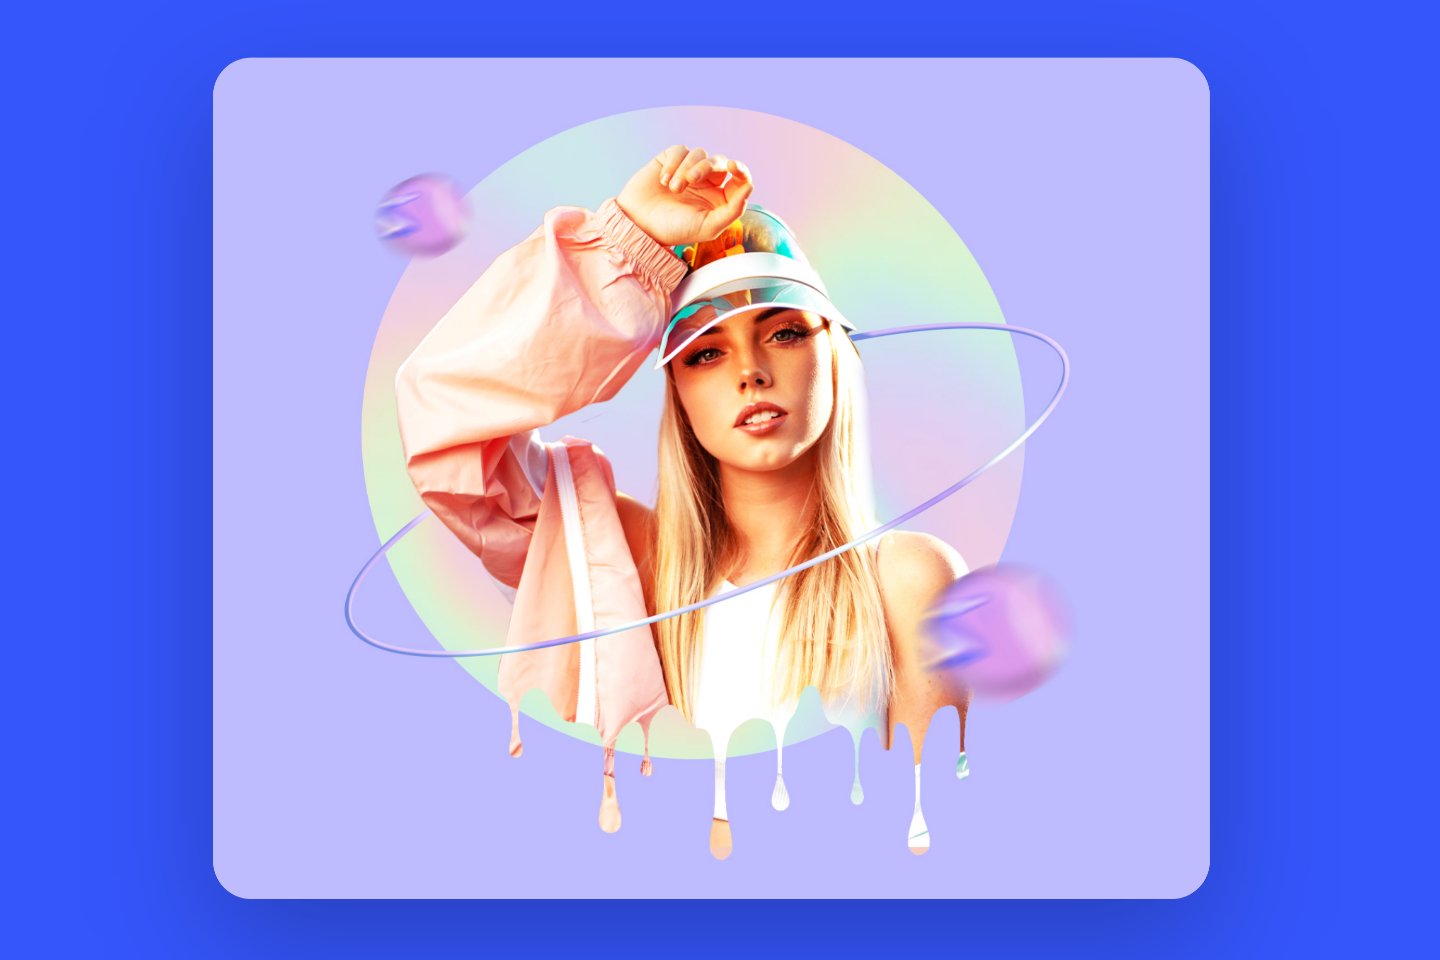 Drip Effect: Turn Images into Drip Art